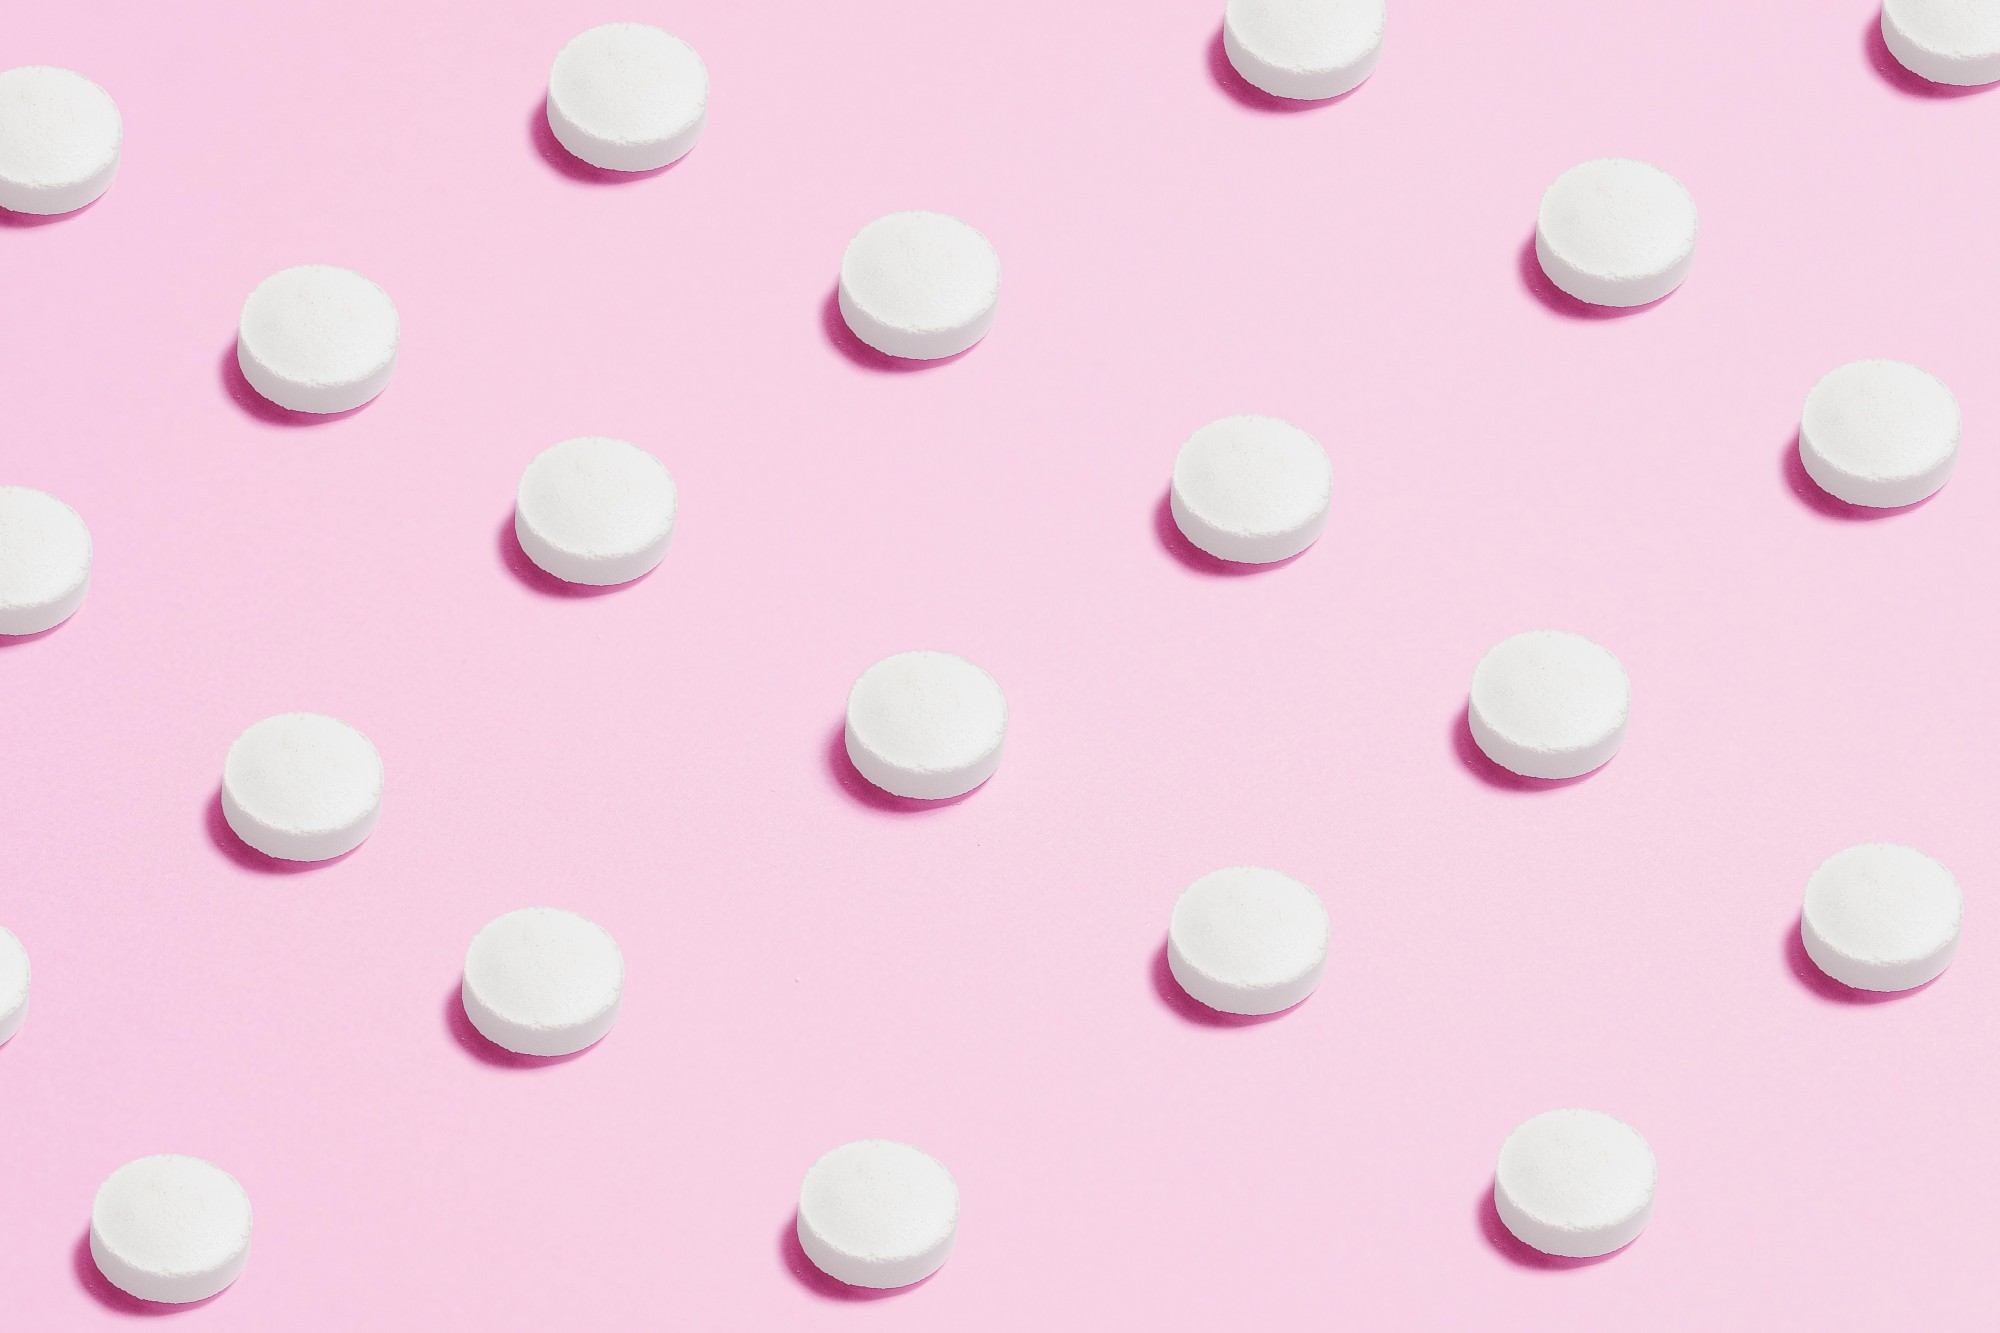 Does the Abortion Pill Cause a Miscarriage?